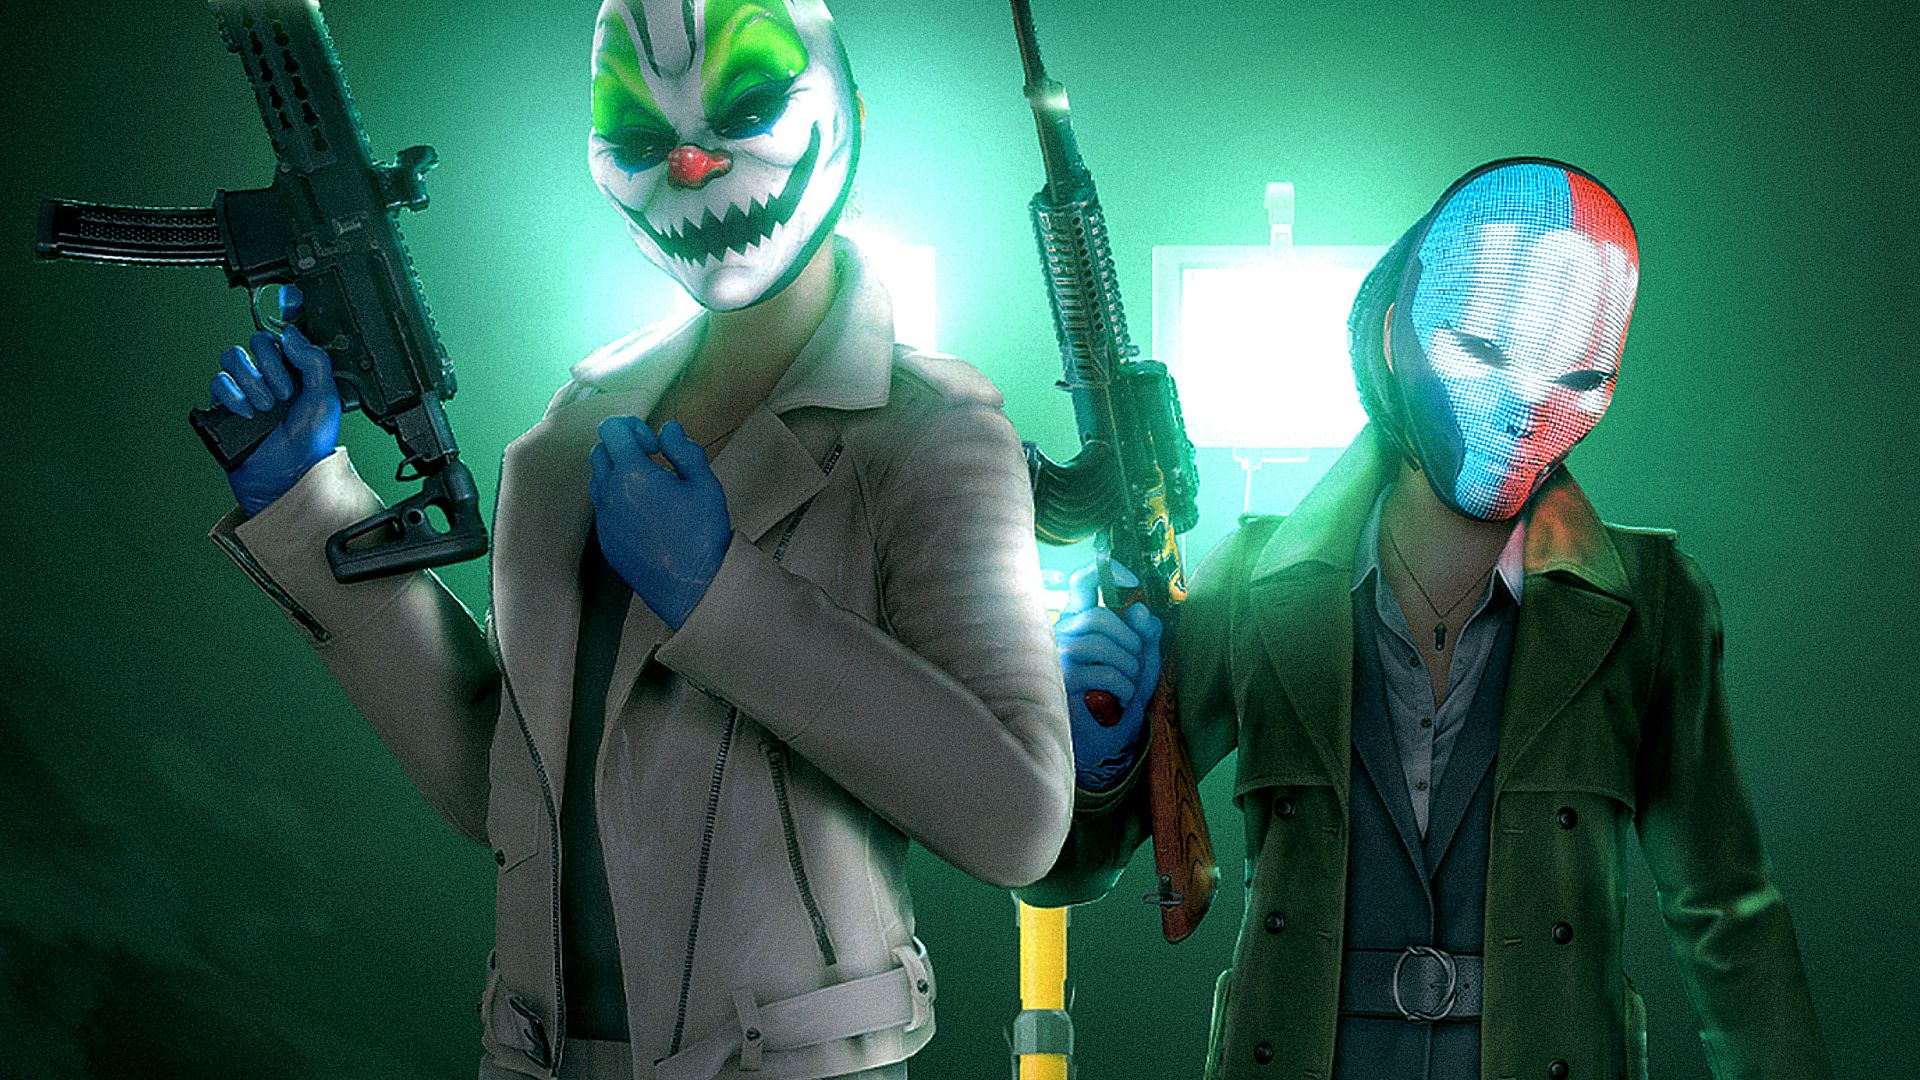 Payday 3 Servers Down Again After Rocky Launch - PlayStation LifeStyle